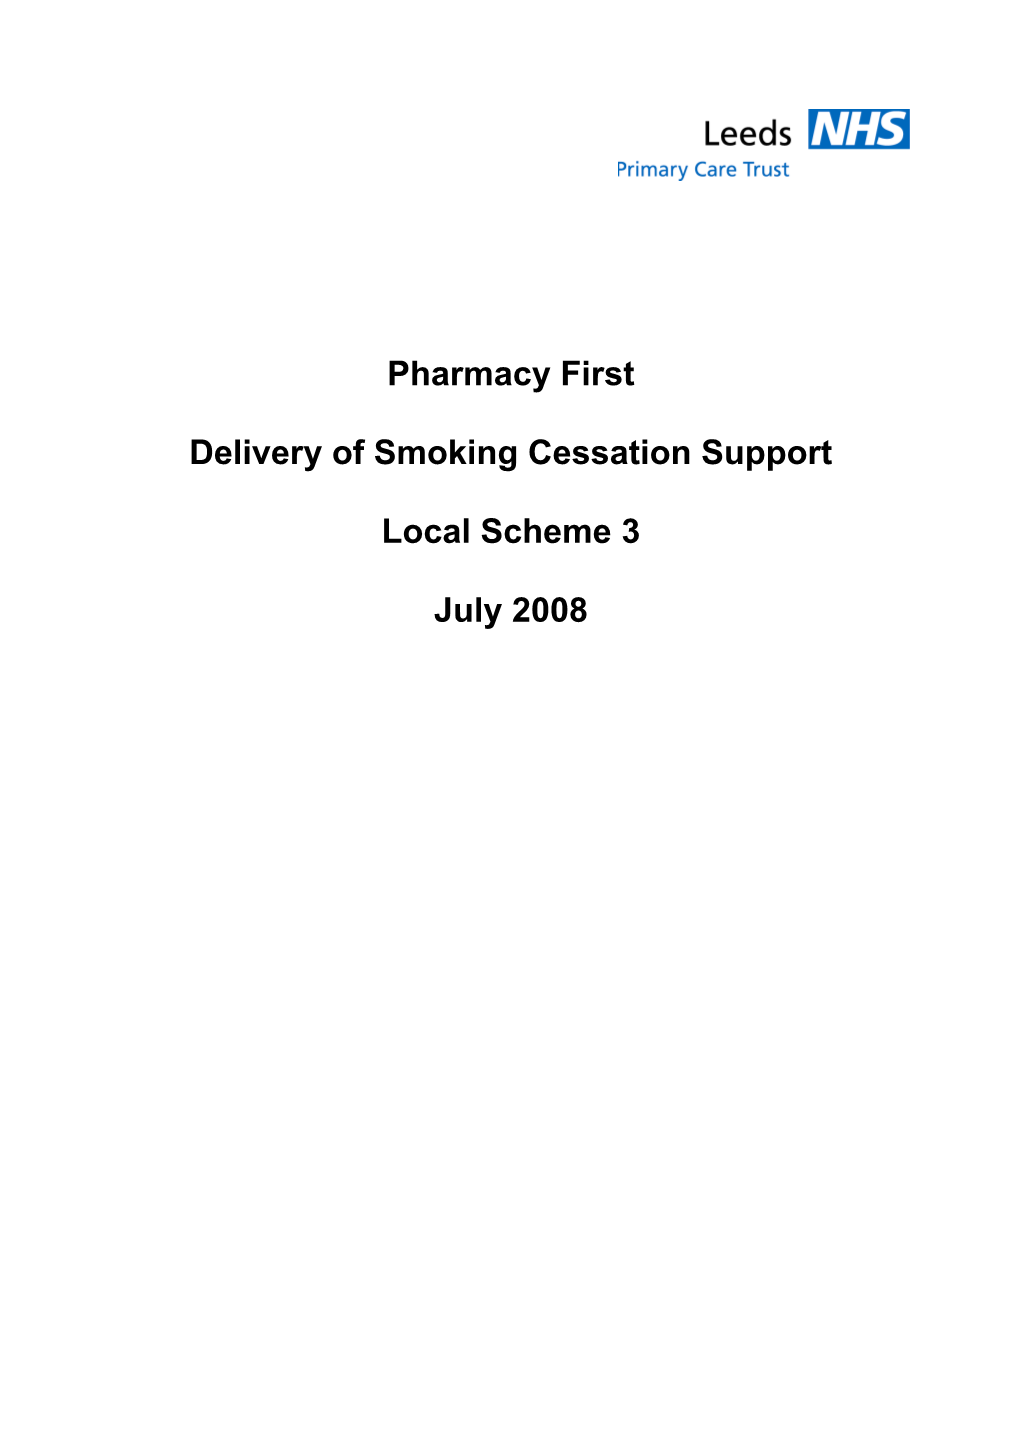 Delivery of Smoking Cessation Support